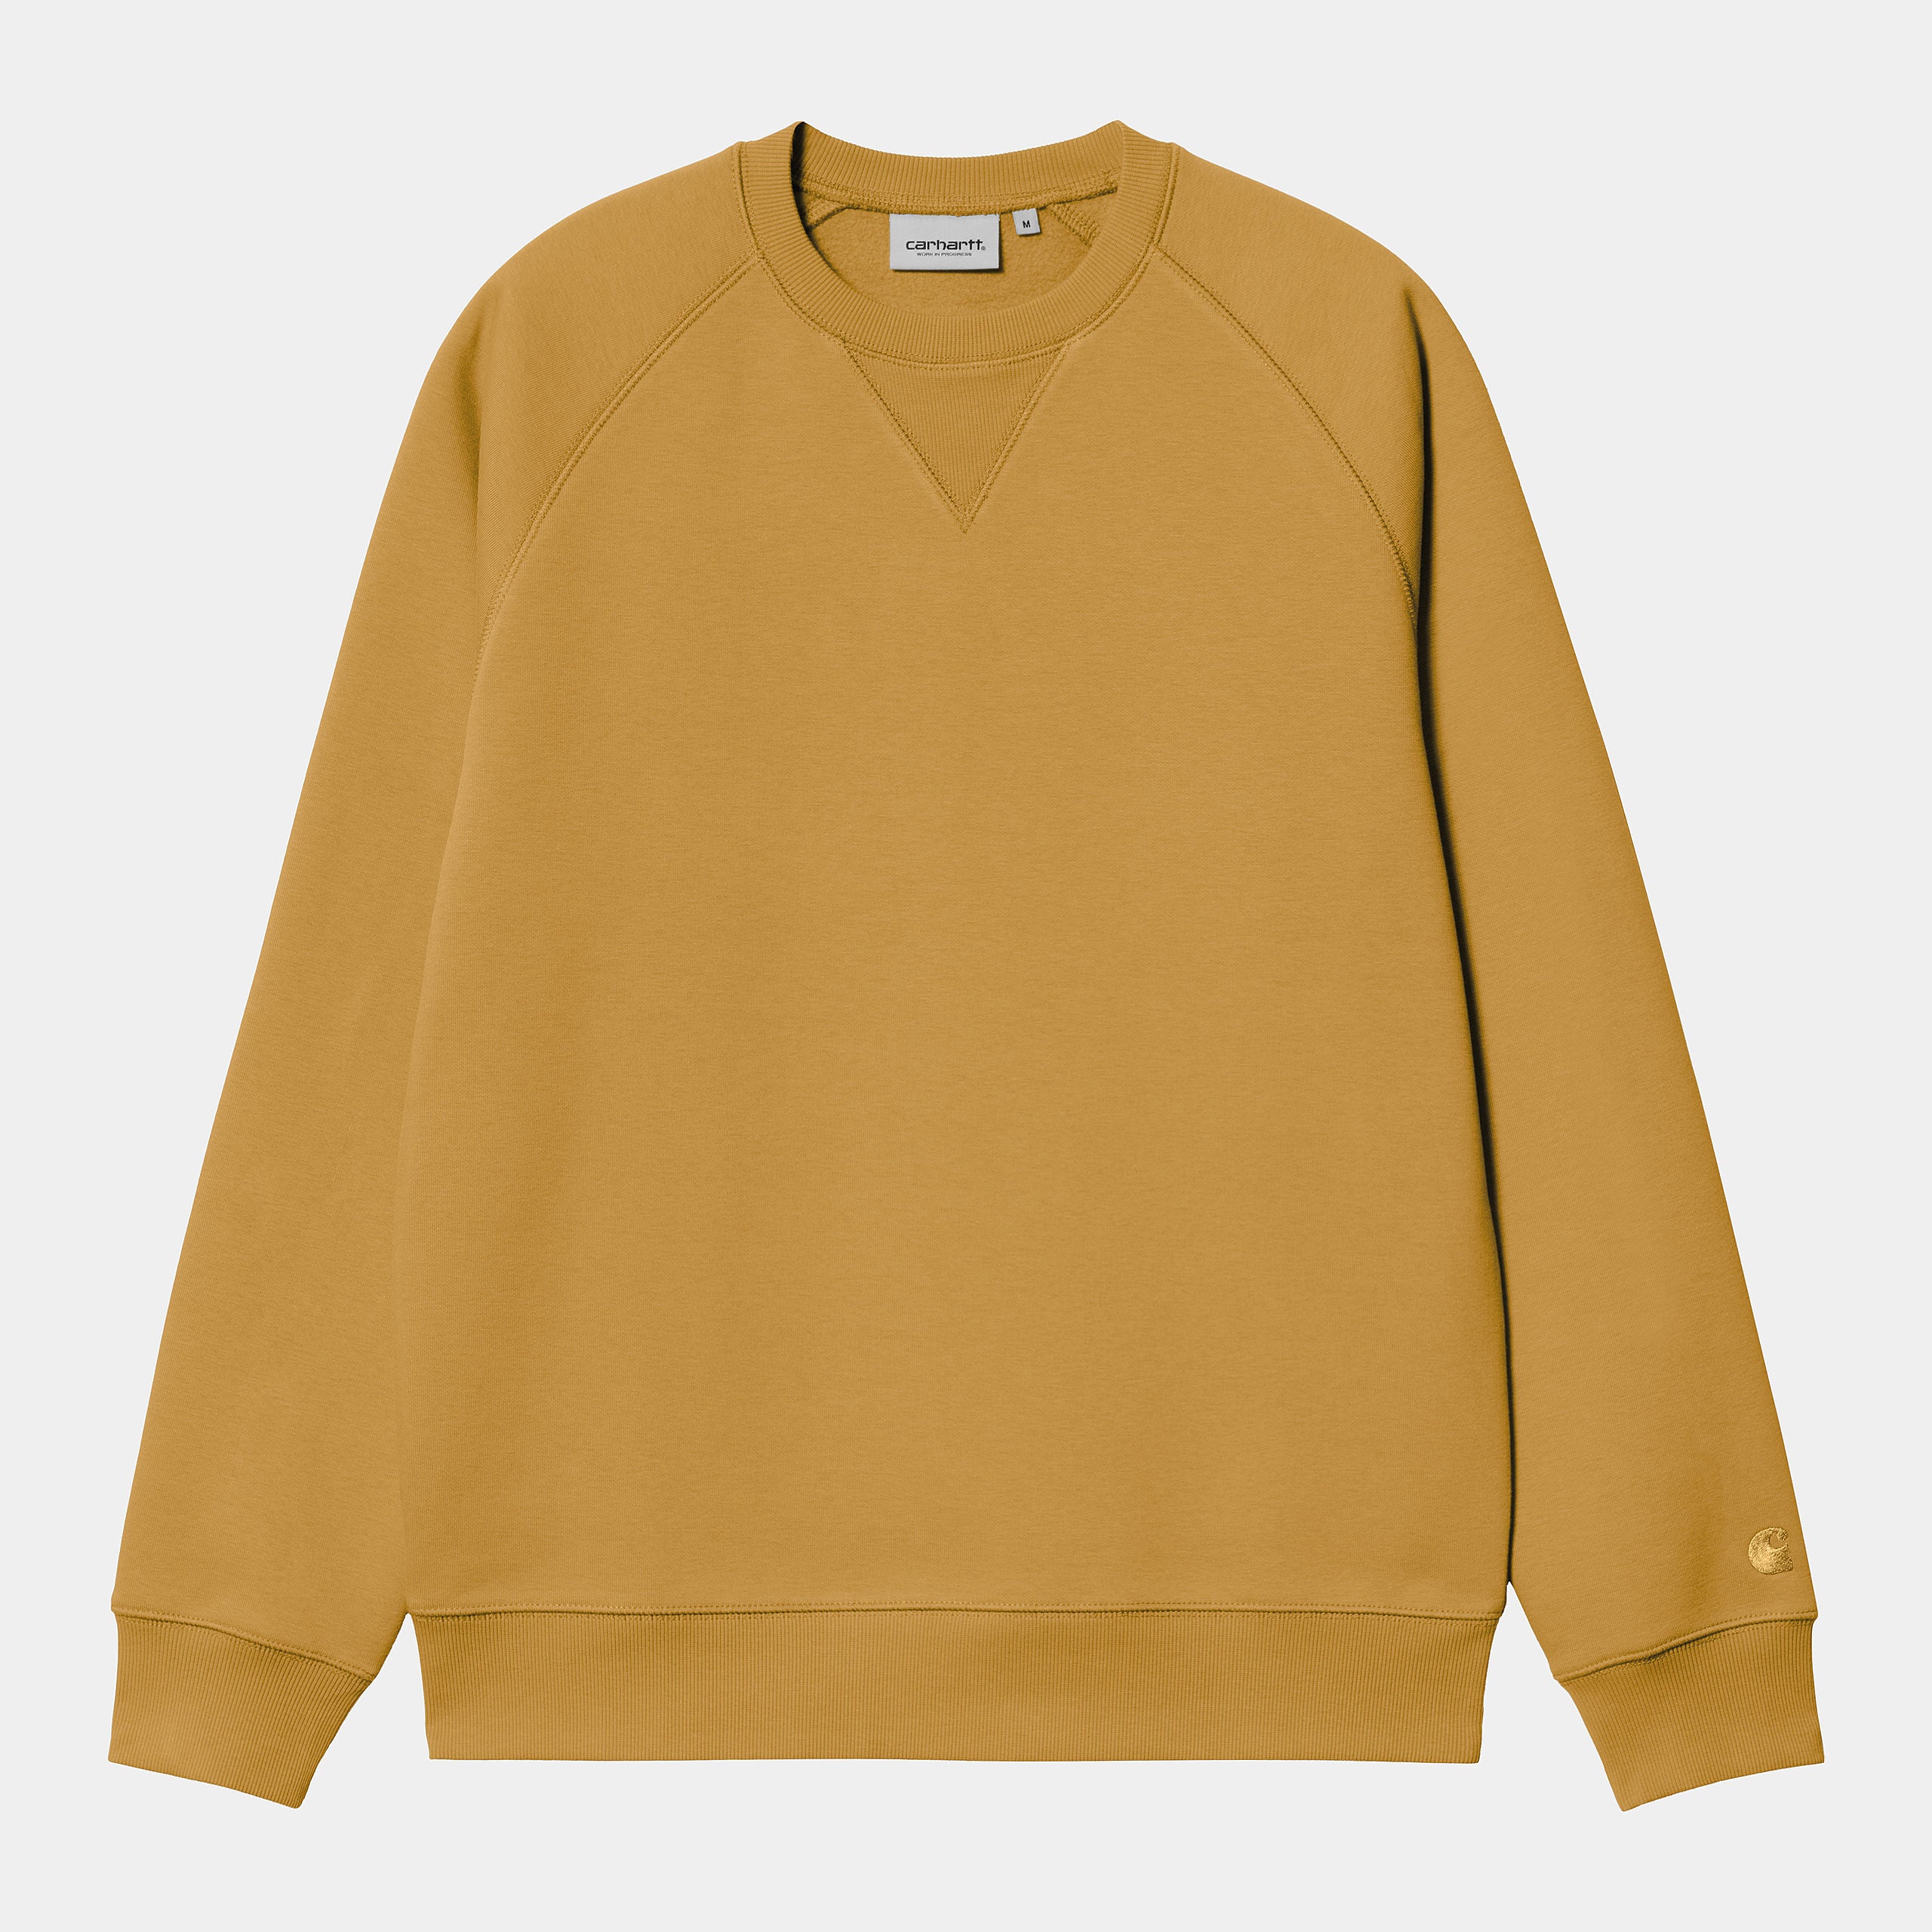 Carhartt WIP Mens Chase Sweat Top - Sunray / Gold